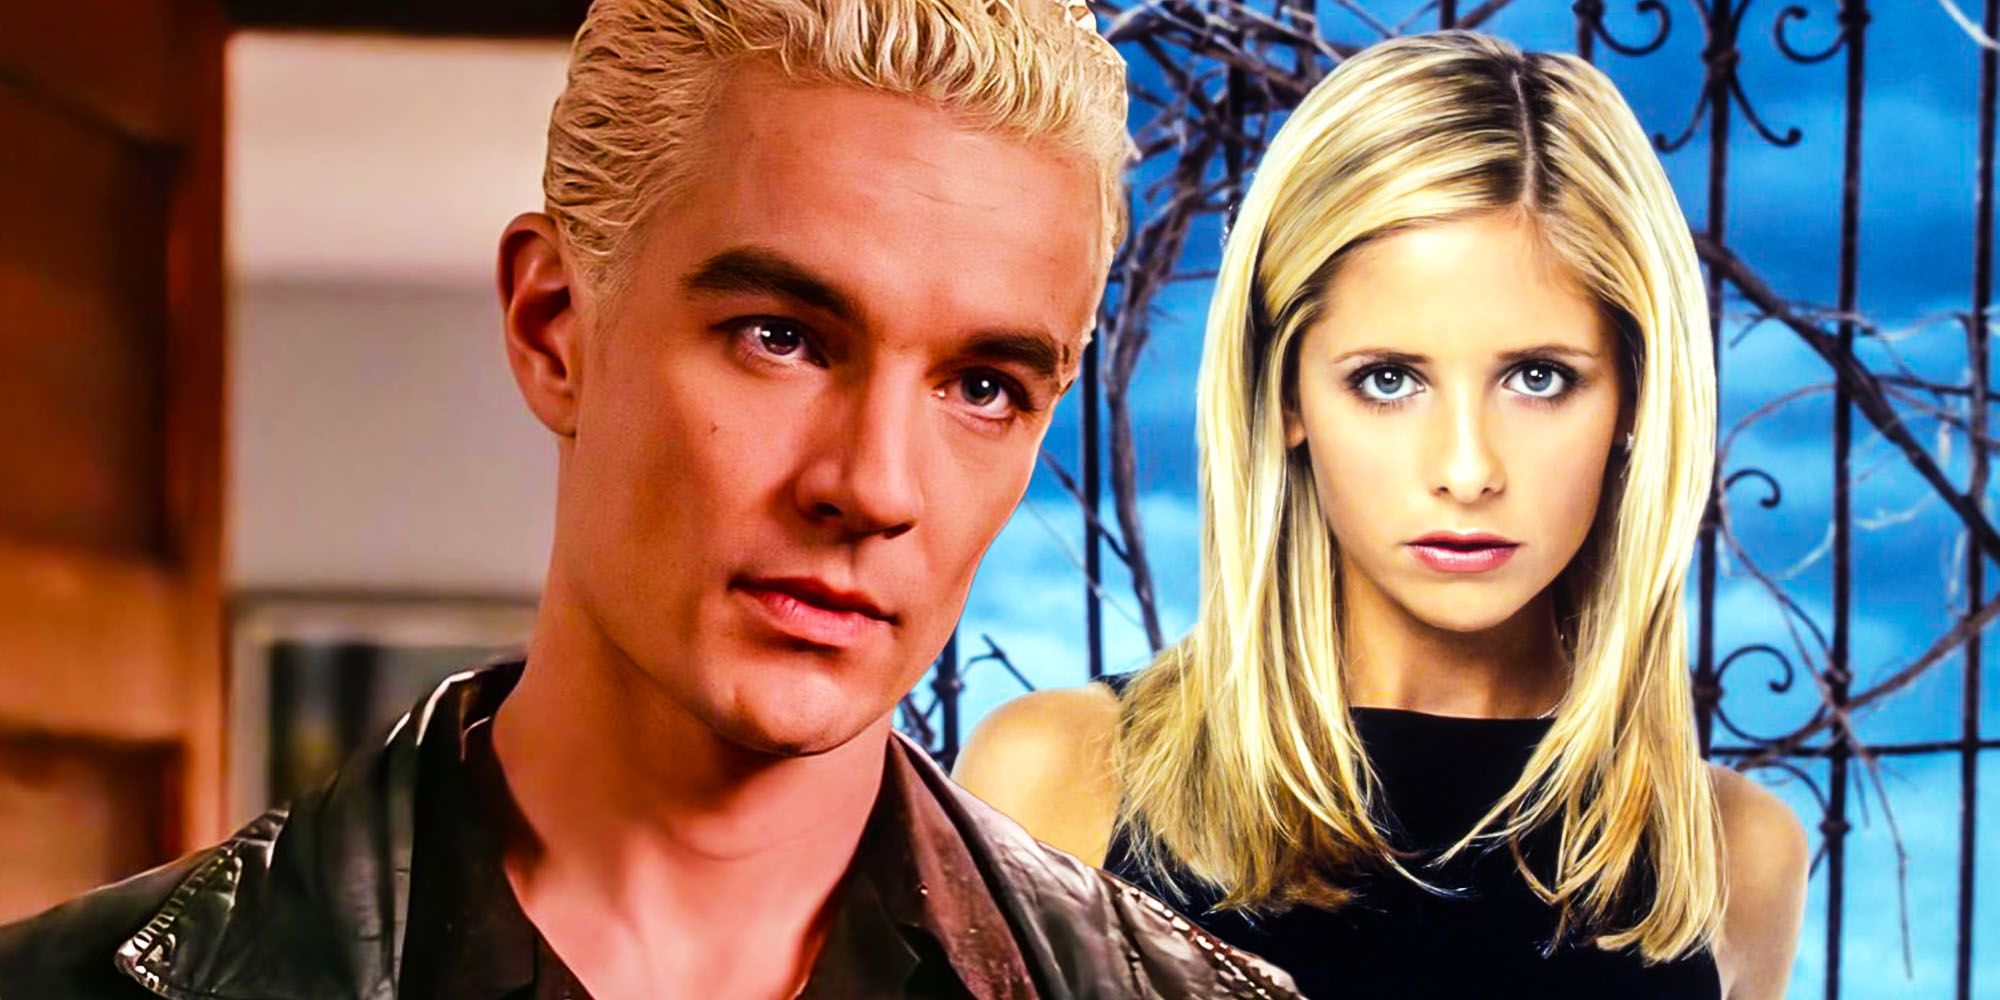 Blended image of Spike and Buffy in Buffy the Vampire Slayer